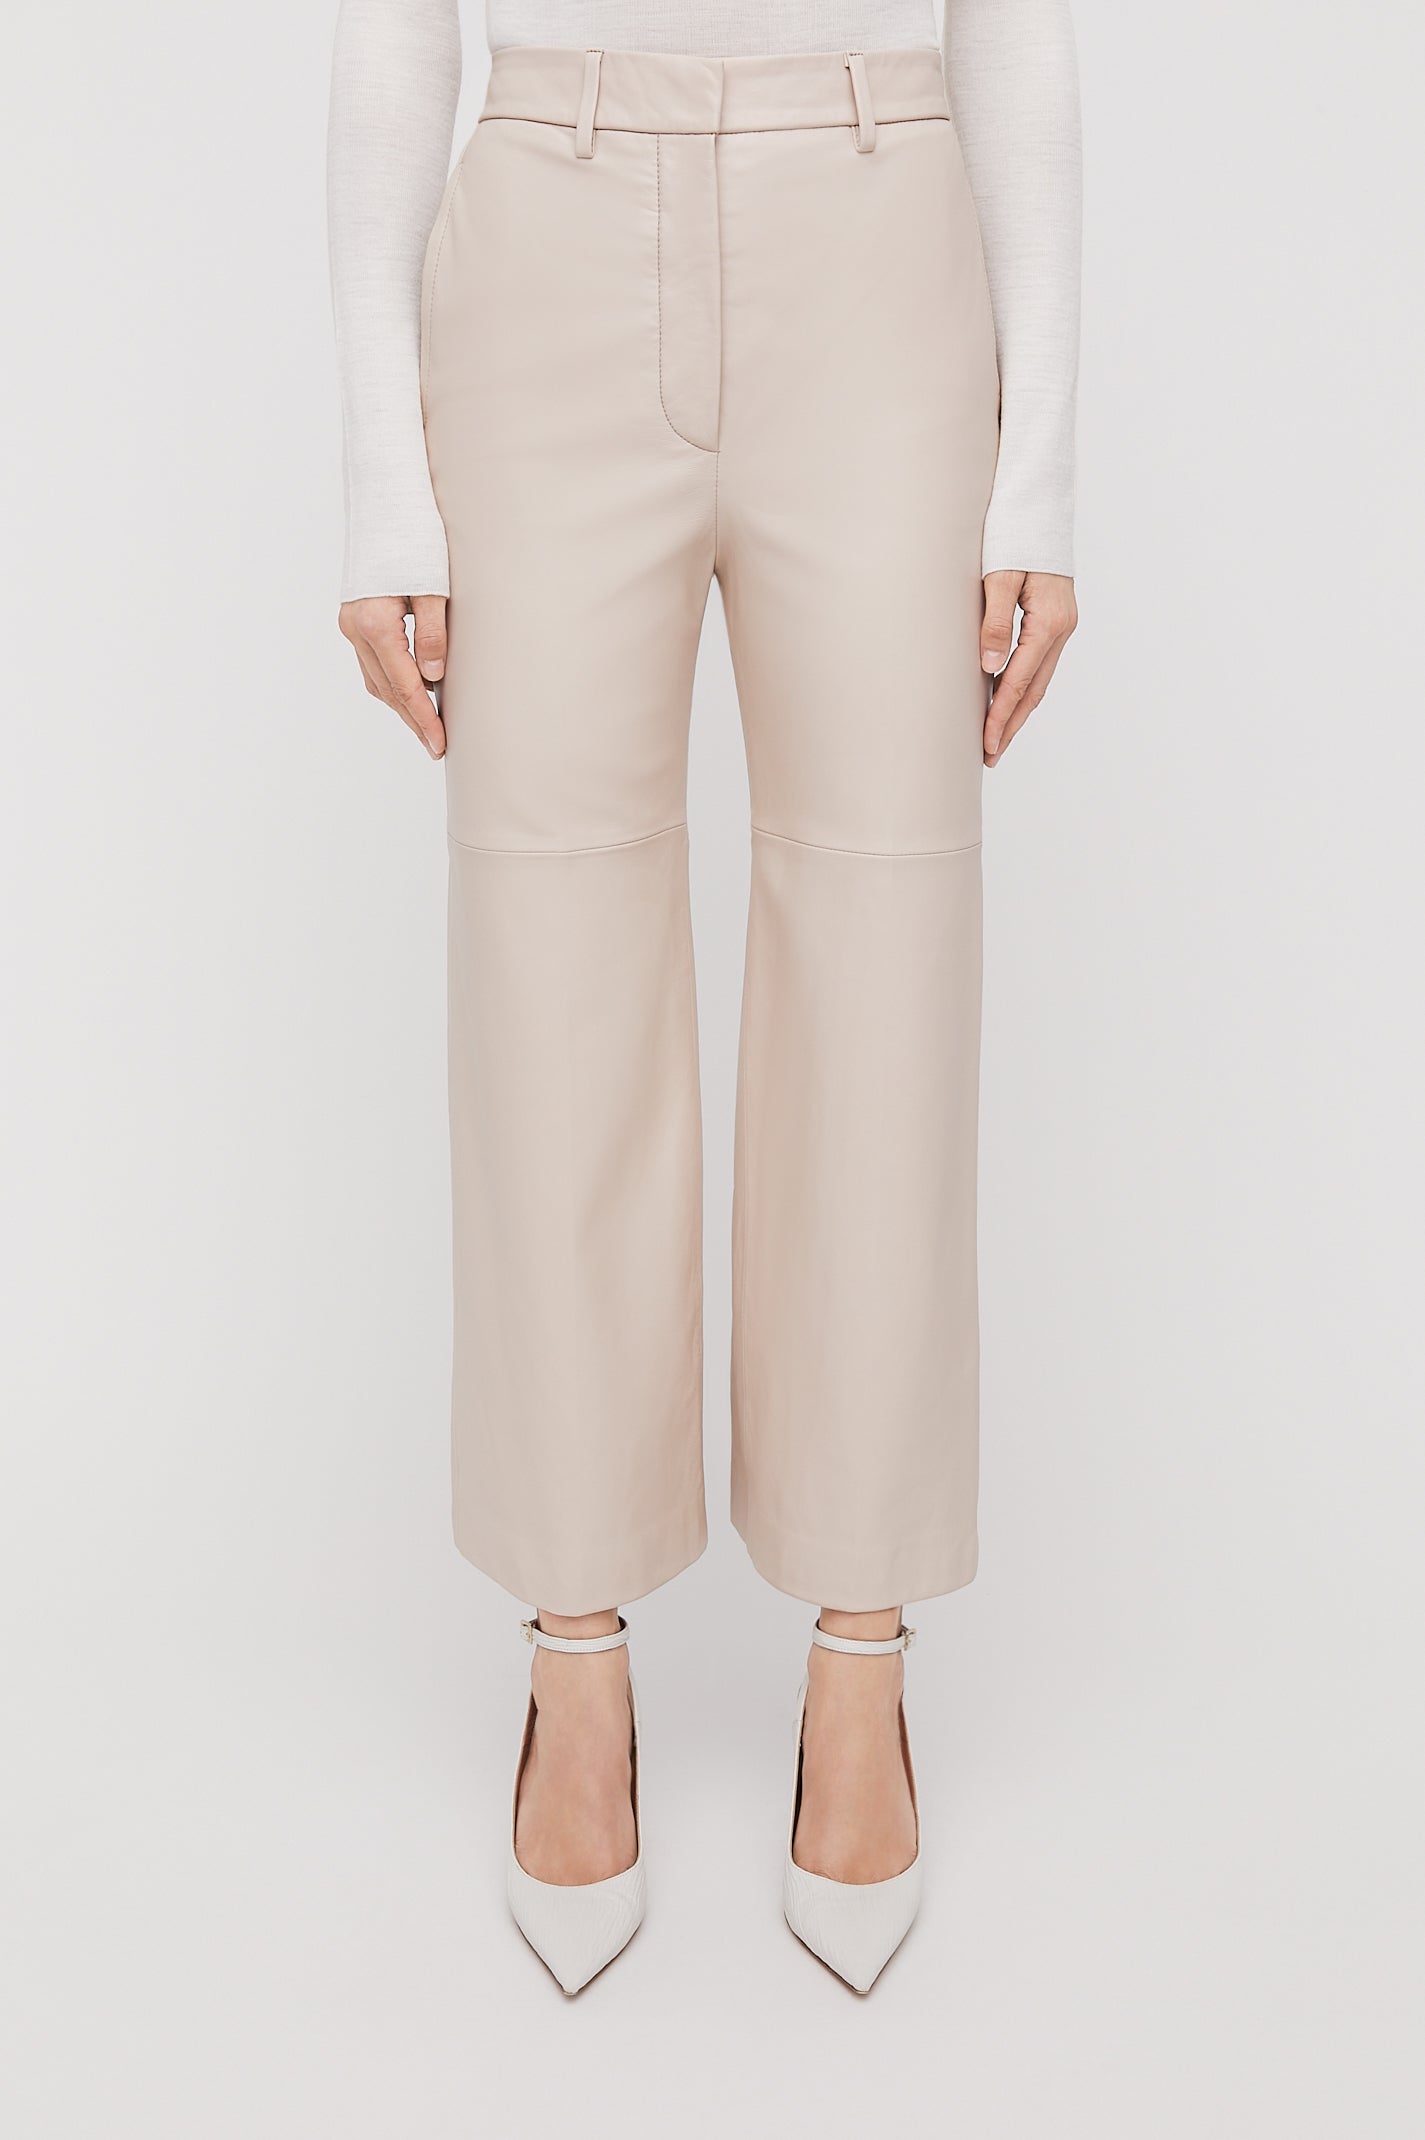 LEATHER CROP WIDE LEG TROUSER - SHELL